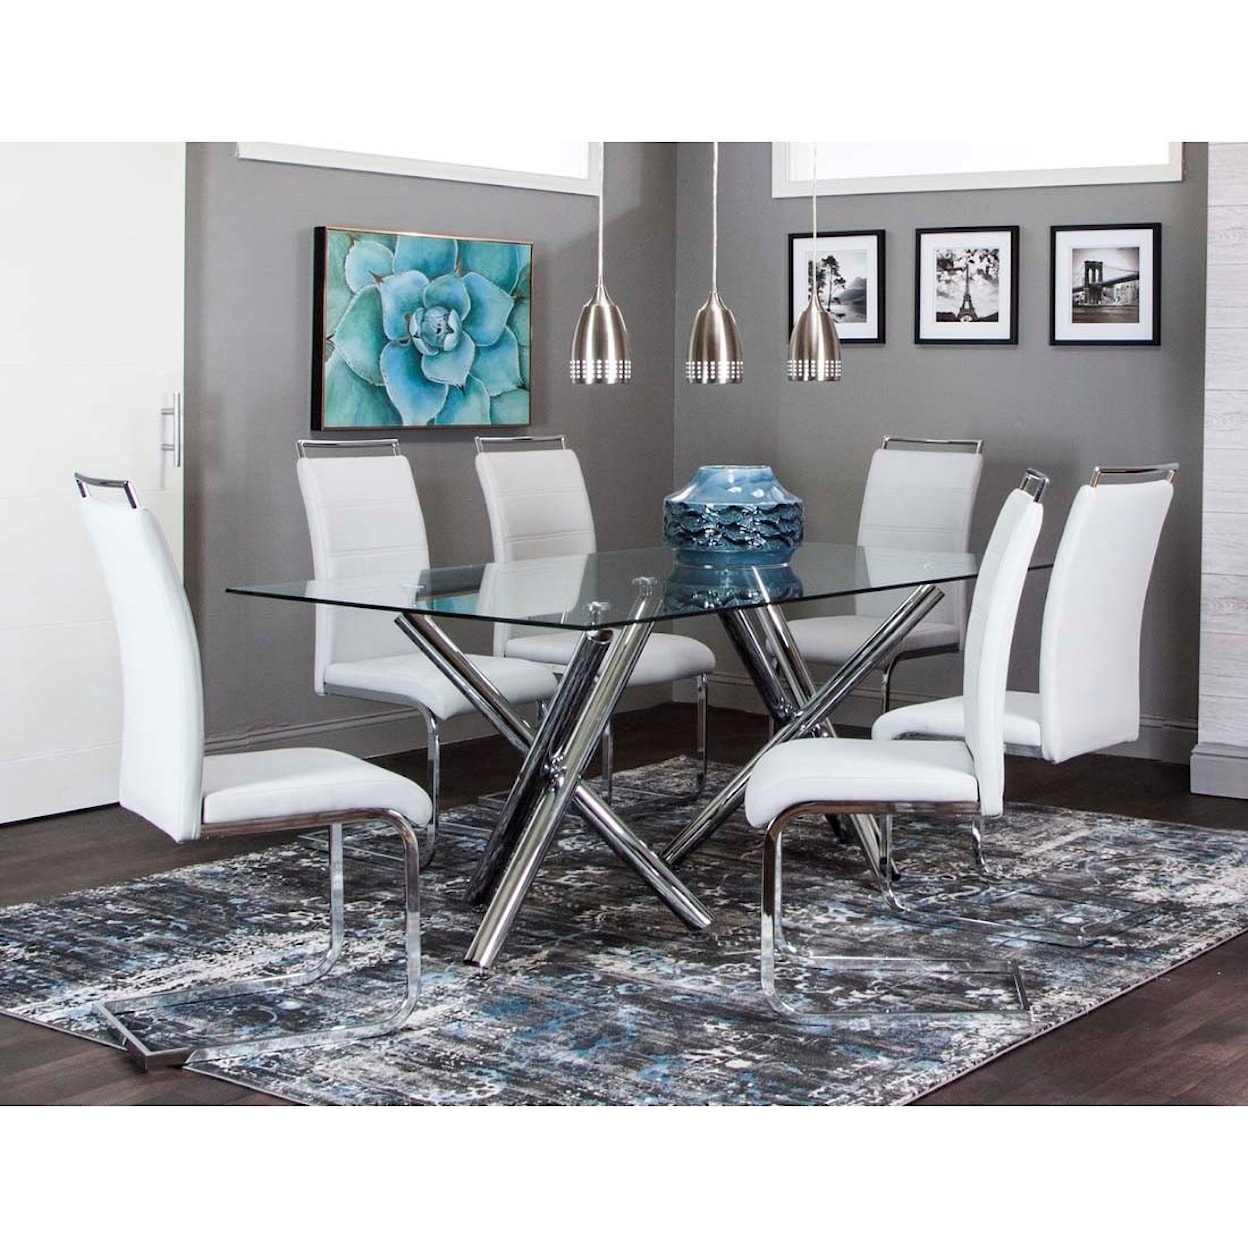 Cramco, Inc Mantis 7-Piece Table and Chair Set